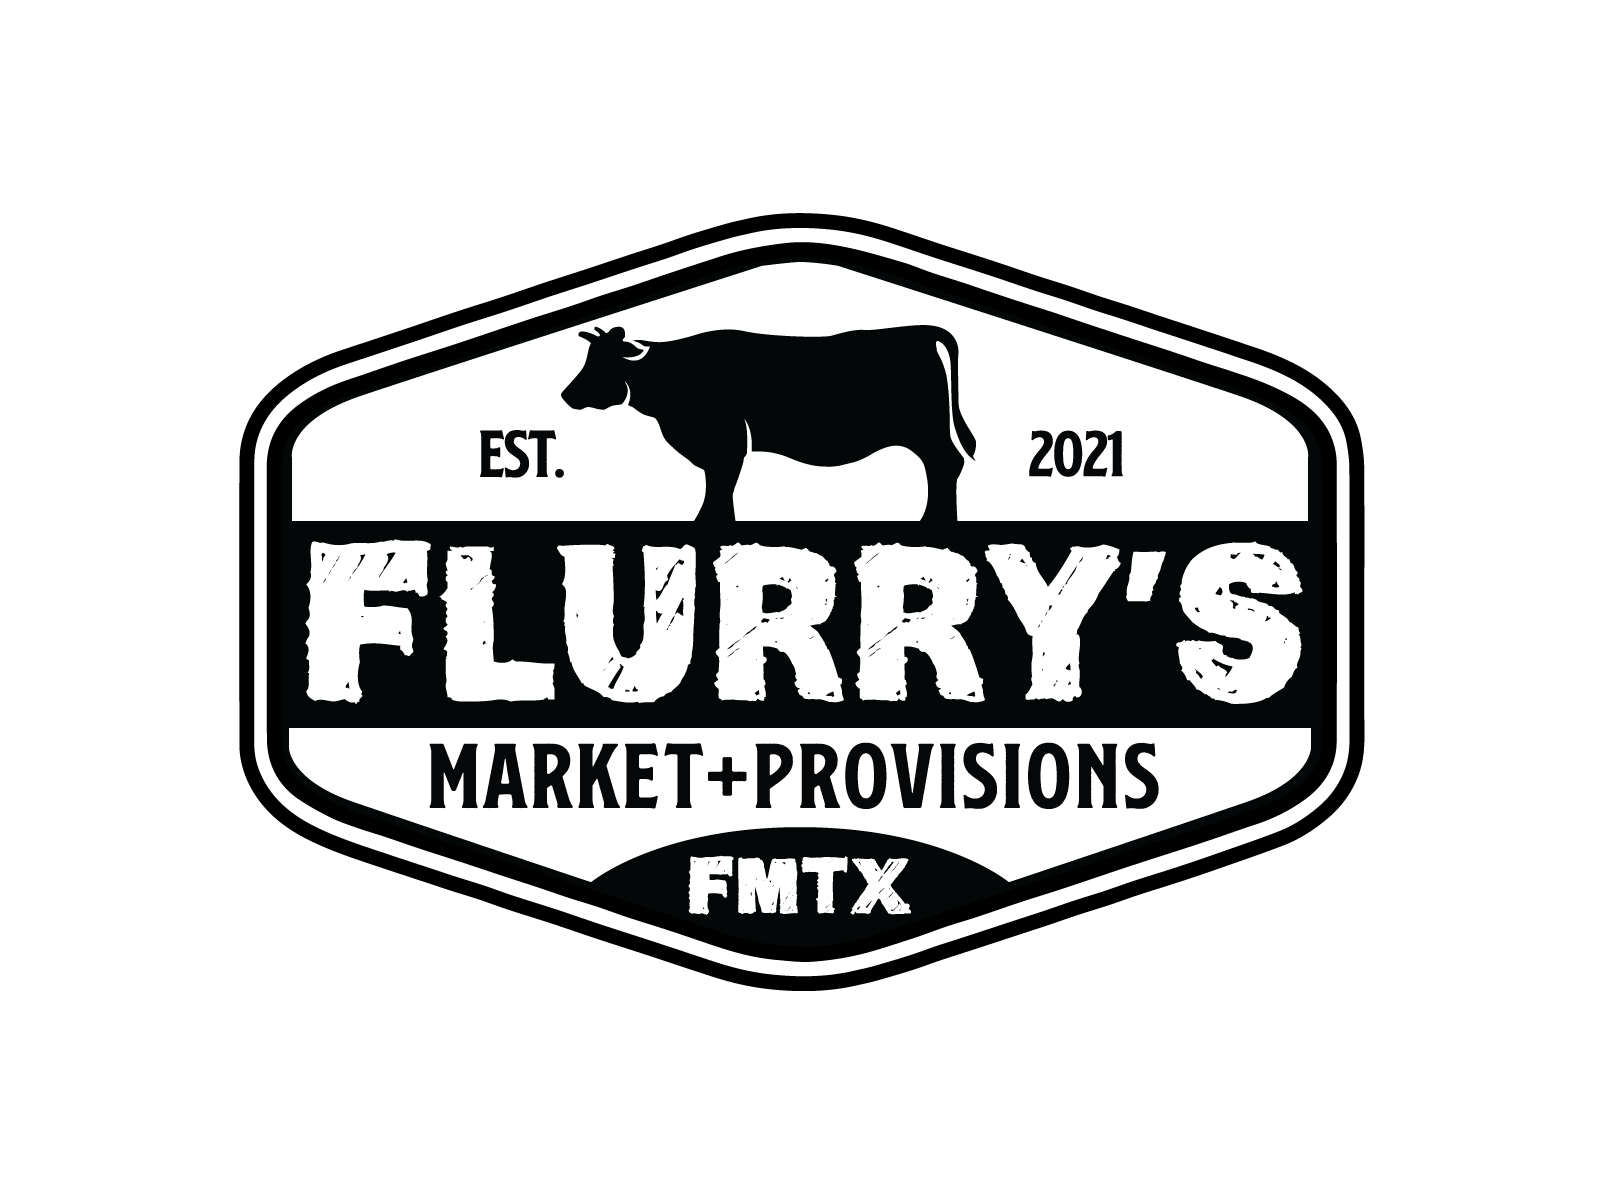 WELCOME TO 
FLURRY'S MARKET + PROVISIONS